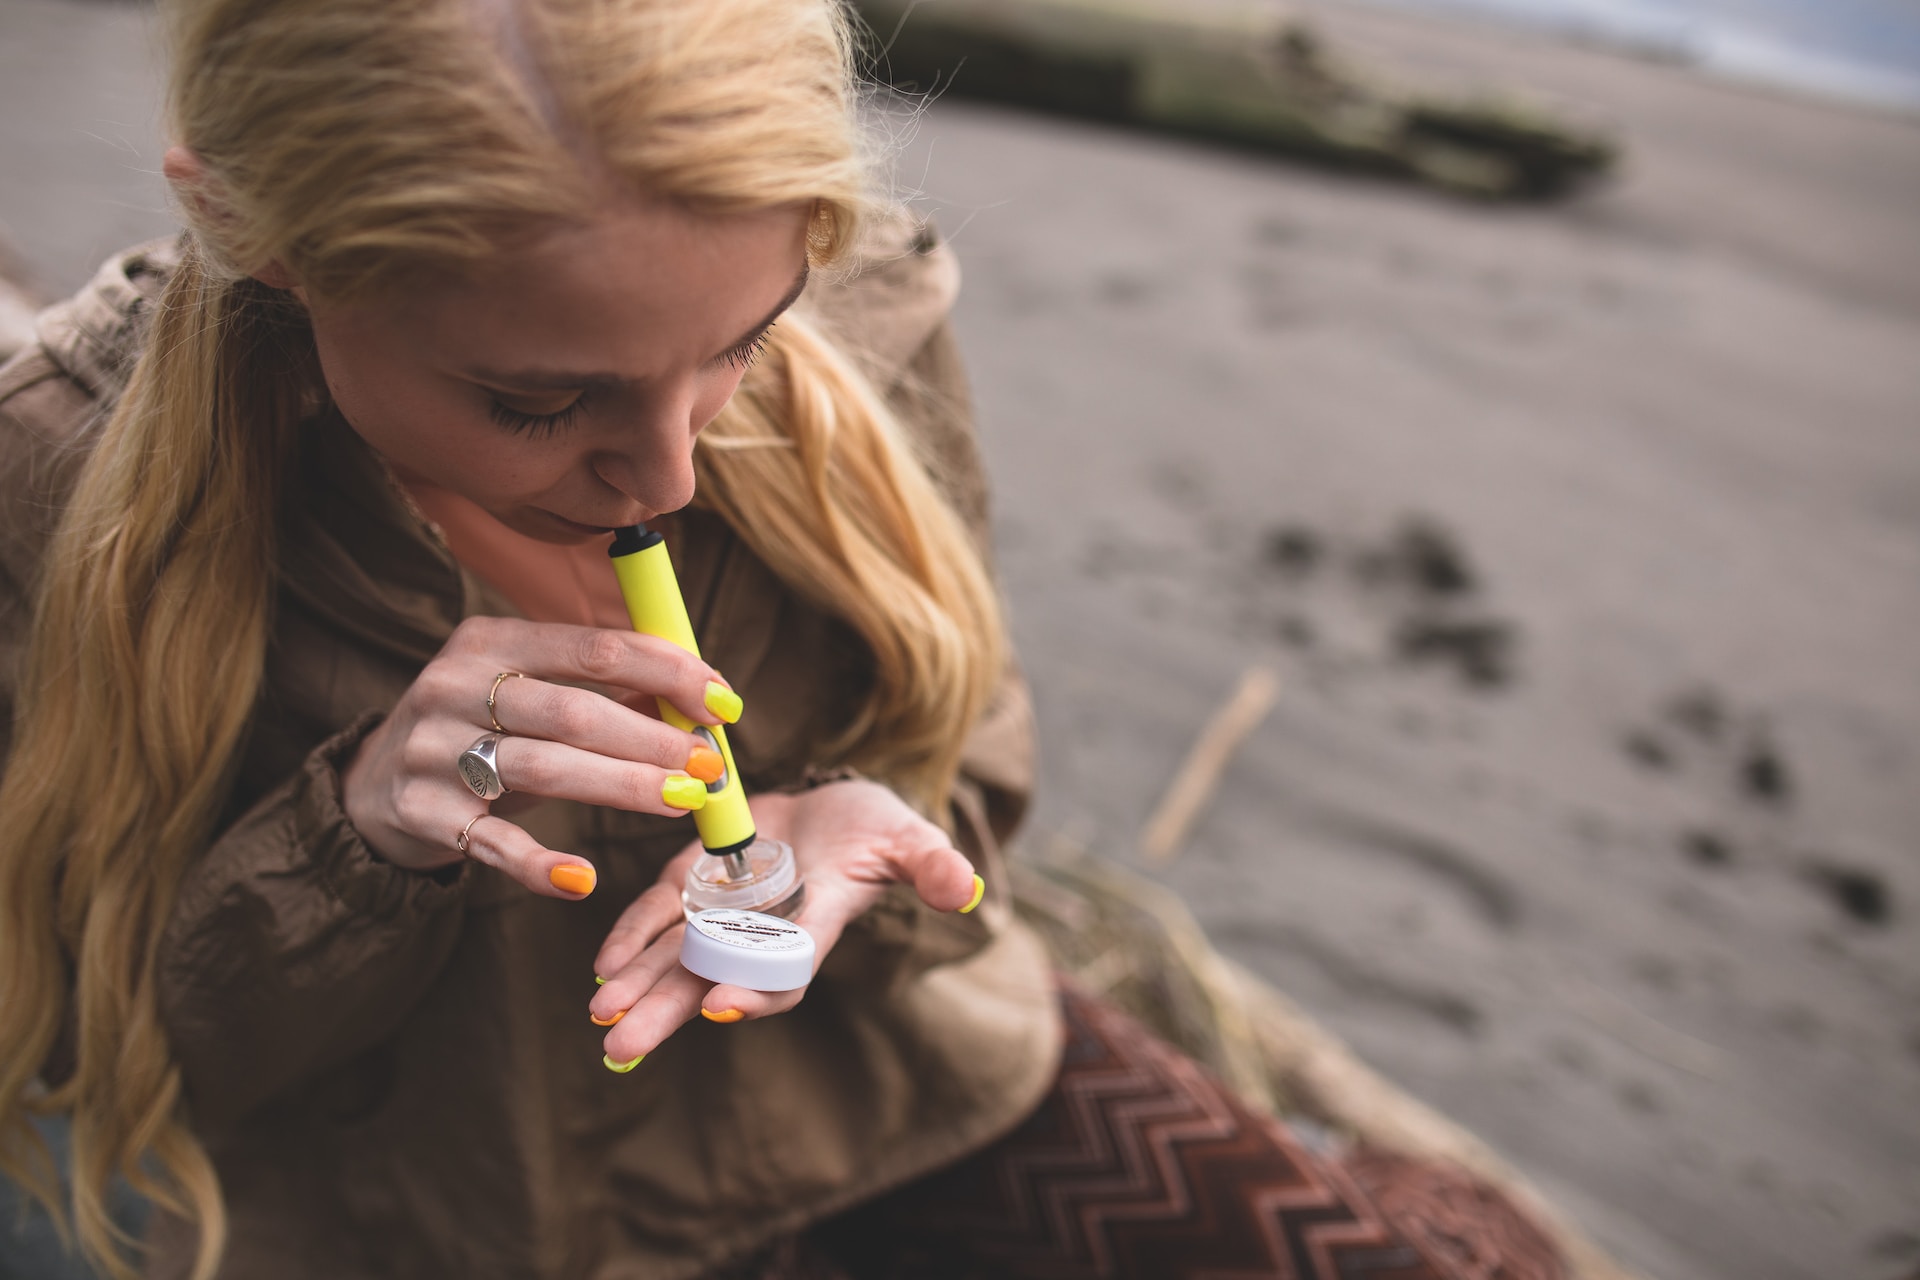 A woman with blonde hair uses a yellow Dip Devices electronic dabber to consume hash rosin.